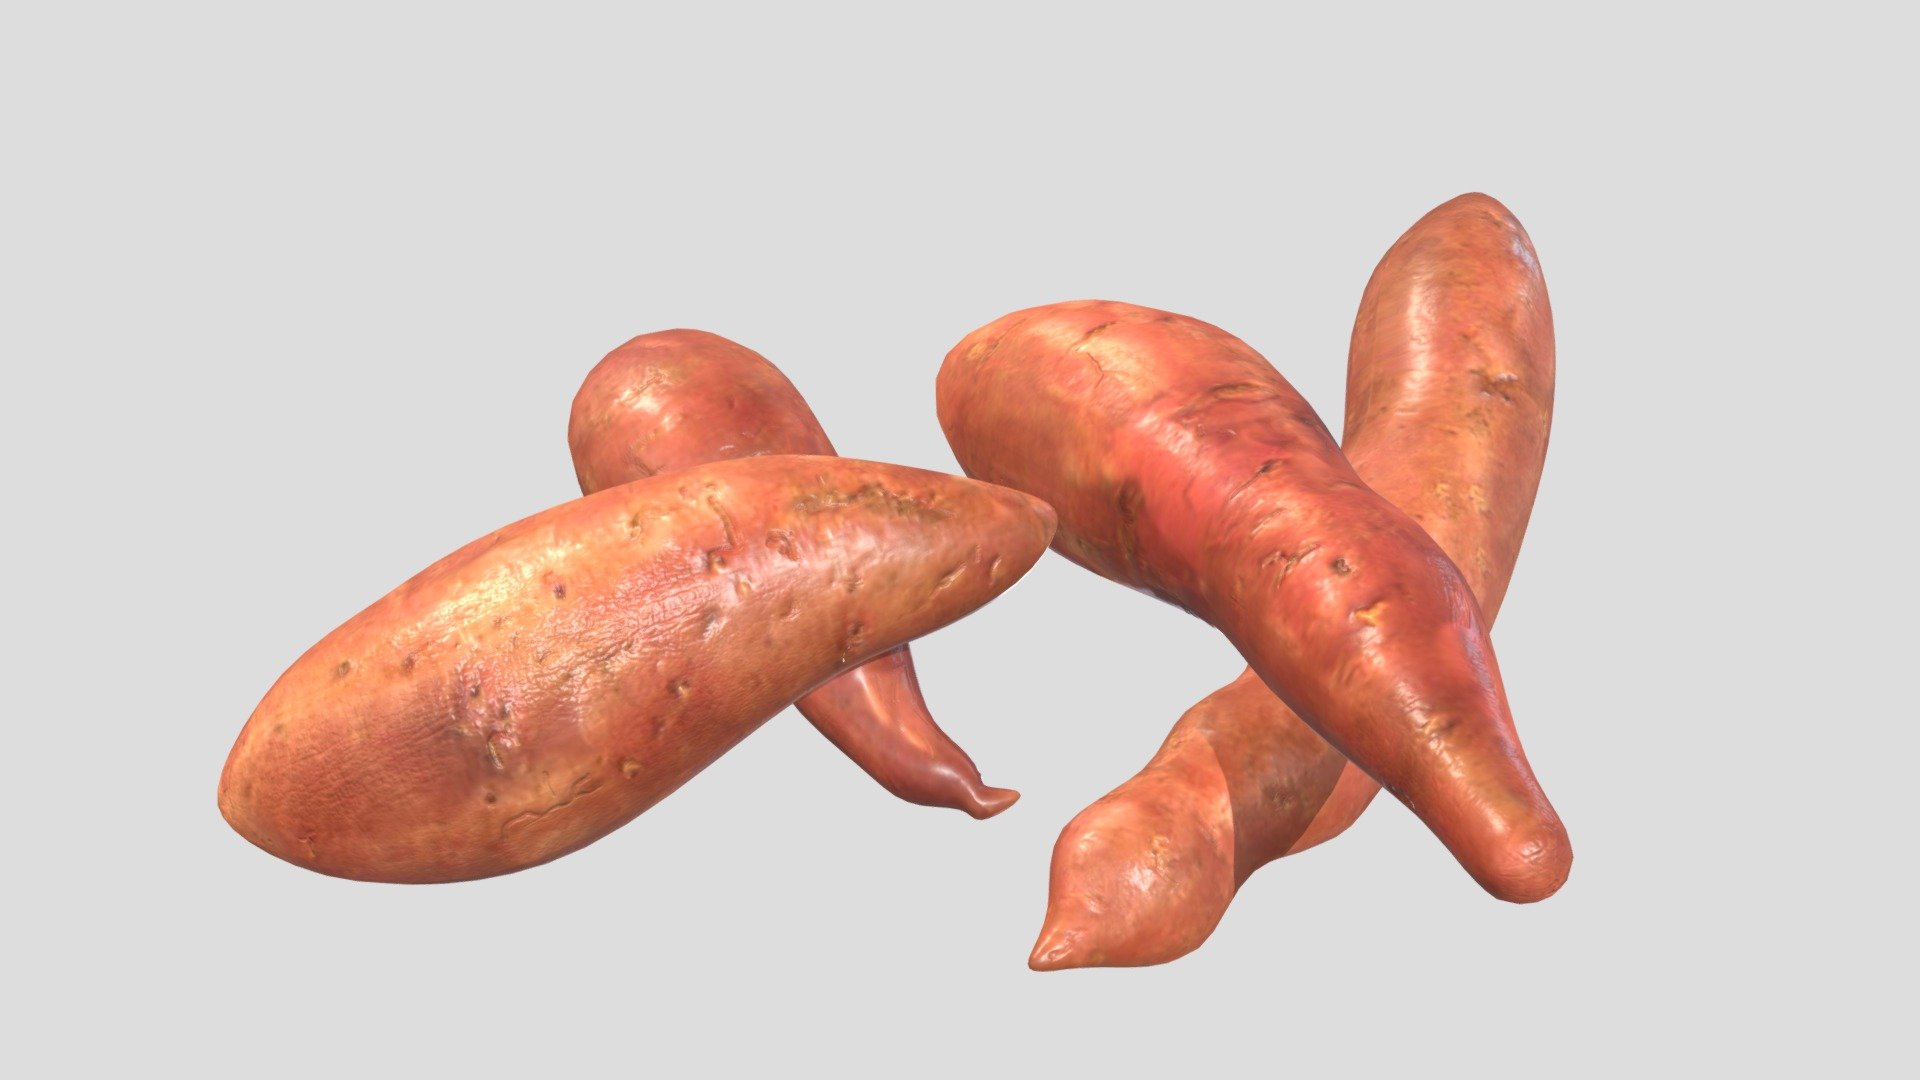 3d model of a Sweet Potato. Perfect for games, scenes or renders.
Model is correctly divided into main parts. All main parts are presented as separate parts therefore materials of objects are easy to be modified or removed and standard parts are easy to be replaced.

TEXTURES: Models includes high textures with maps: Base Color (.png) Height (.png) Metallic (.png) Normal (.png) Roughness (.png)
FORMATS: .obj .dae .stl .blend .fbx
GENERAL: Easy editable. Model is fully textured.

Vertices:2.5k Polygons: 2.5k

All formats have been tested and work correctly.
Some files may need textures or materials adjusted or added depending on the program they are imported into 3d model